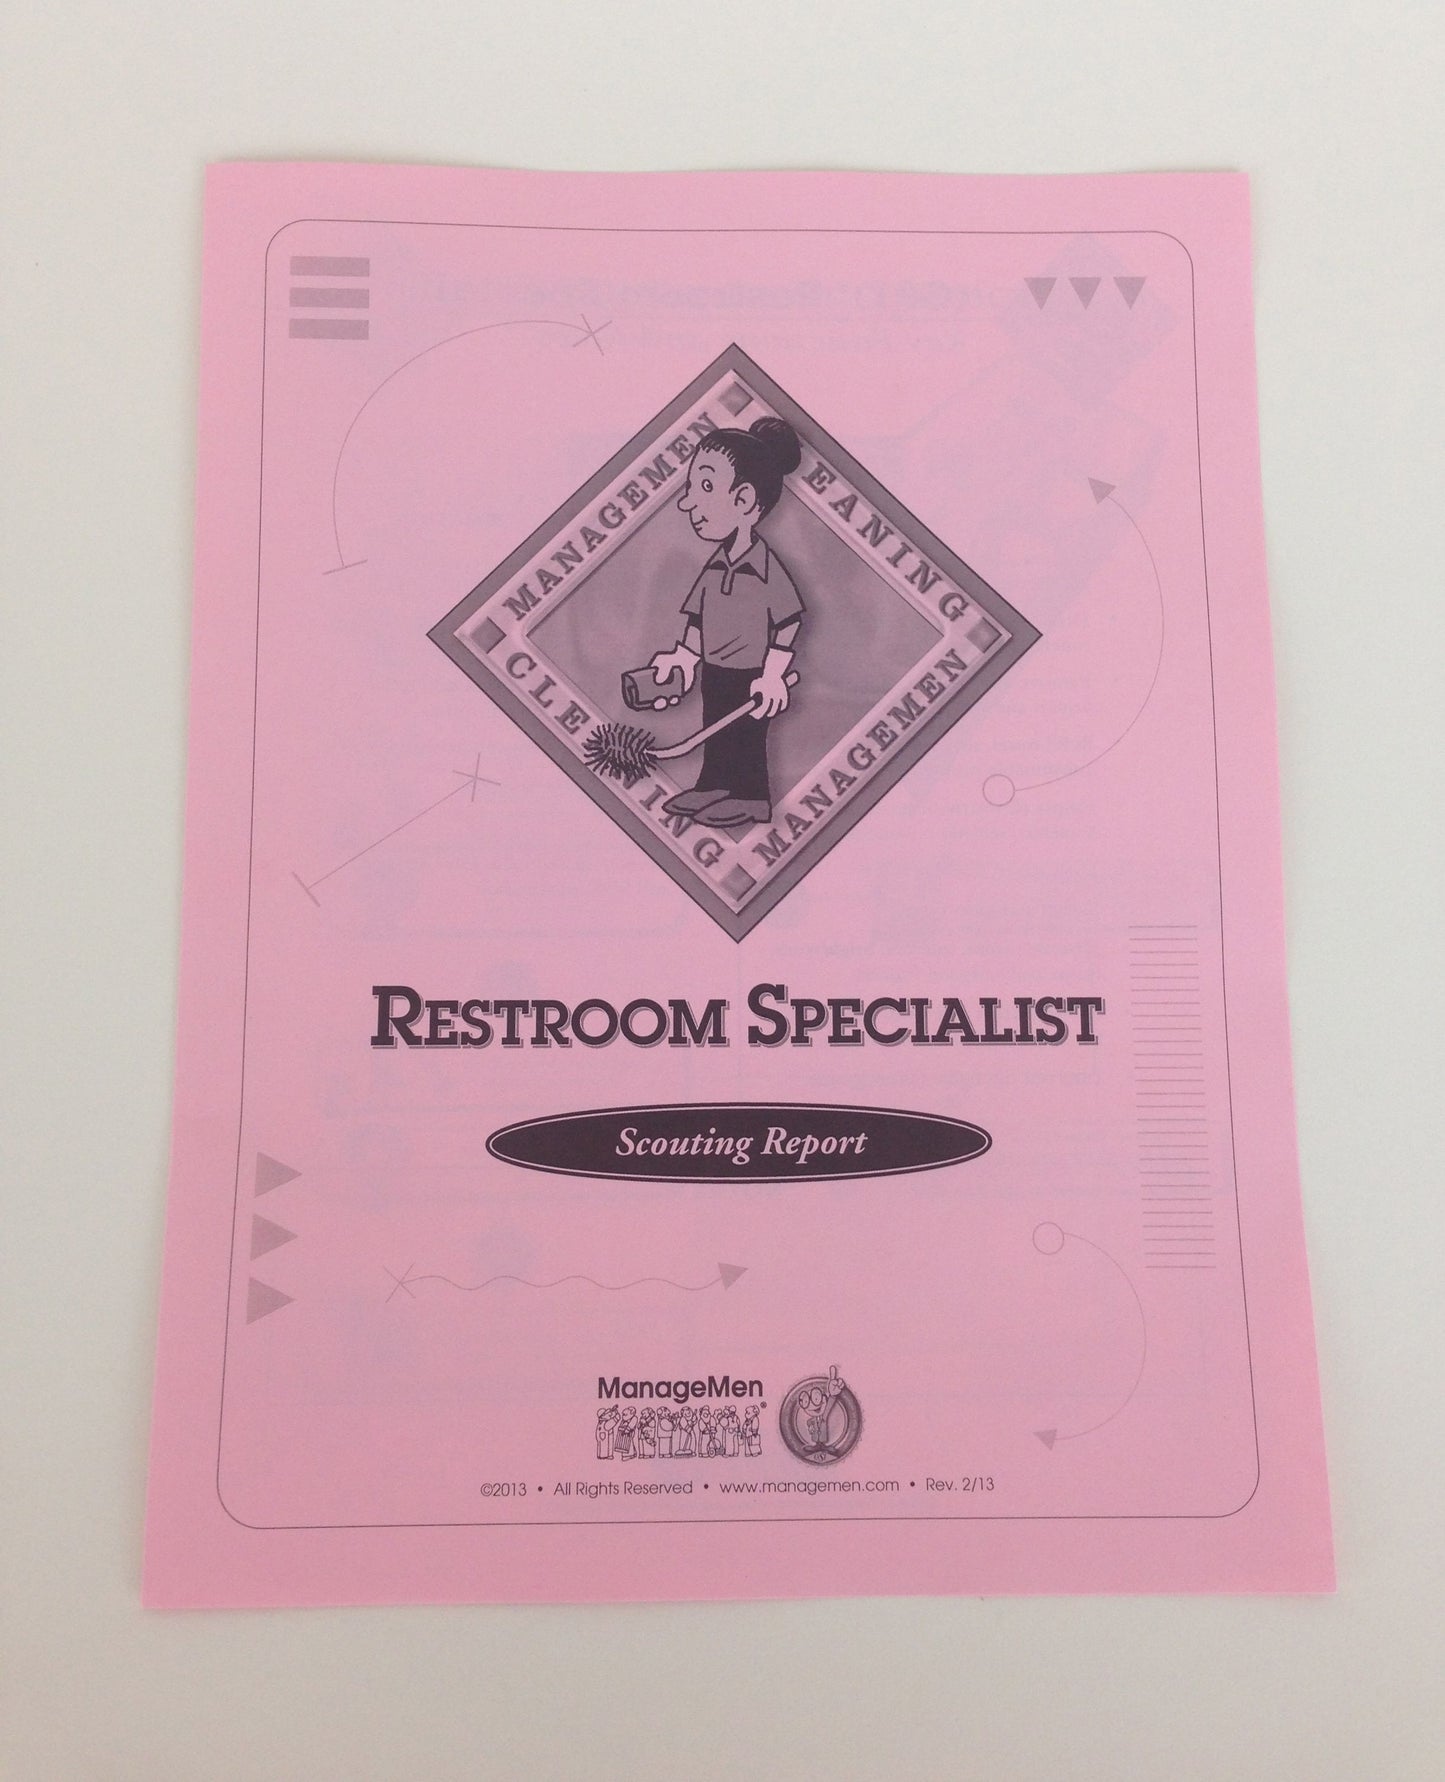 Restroom Specialist Scouting Reports